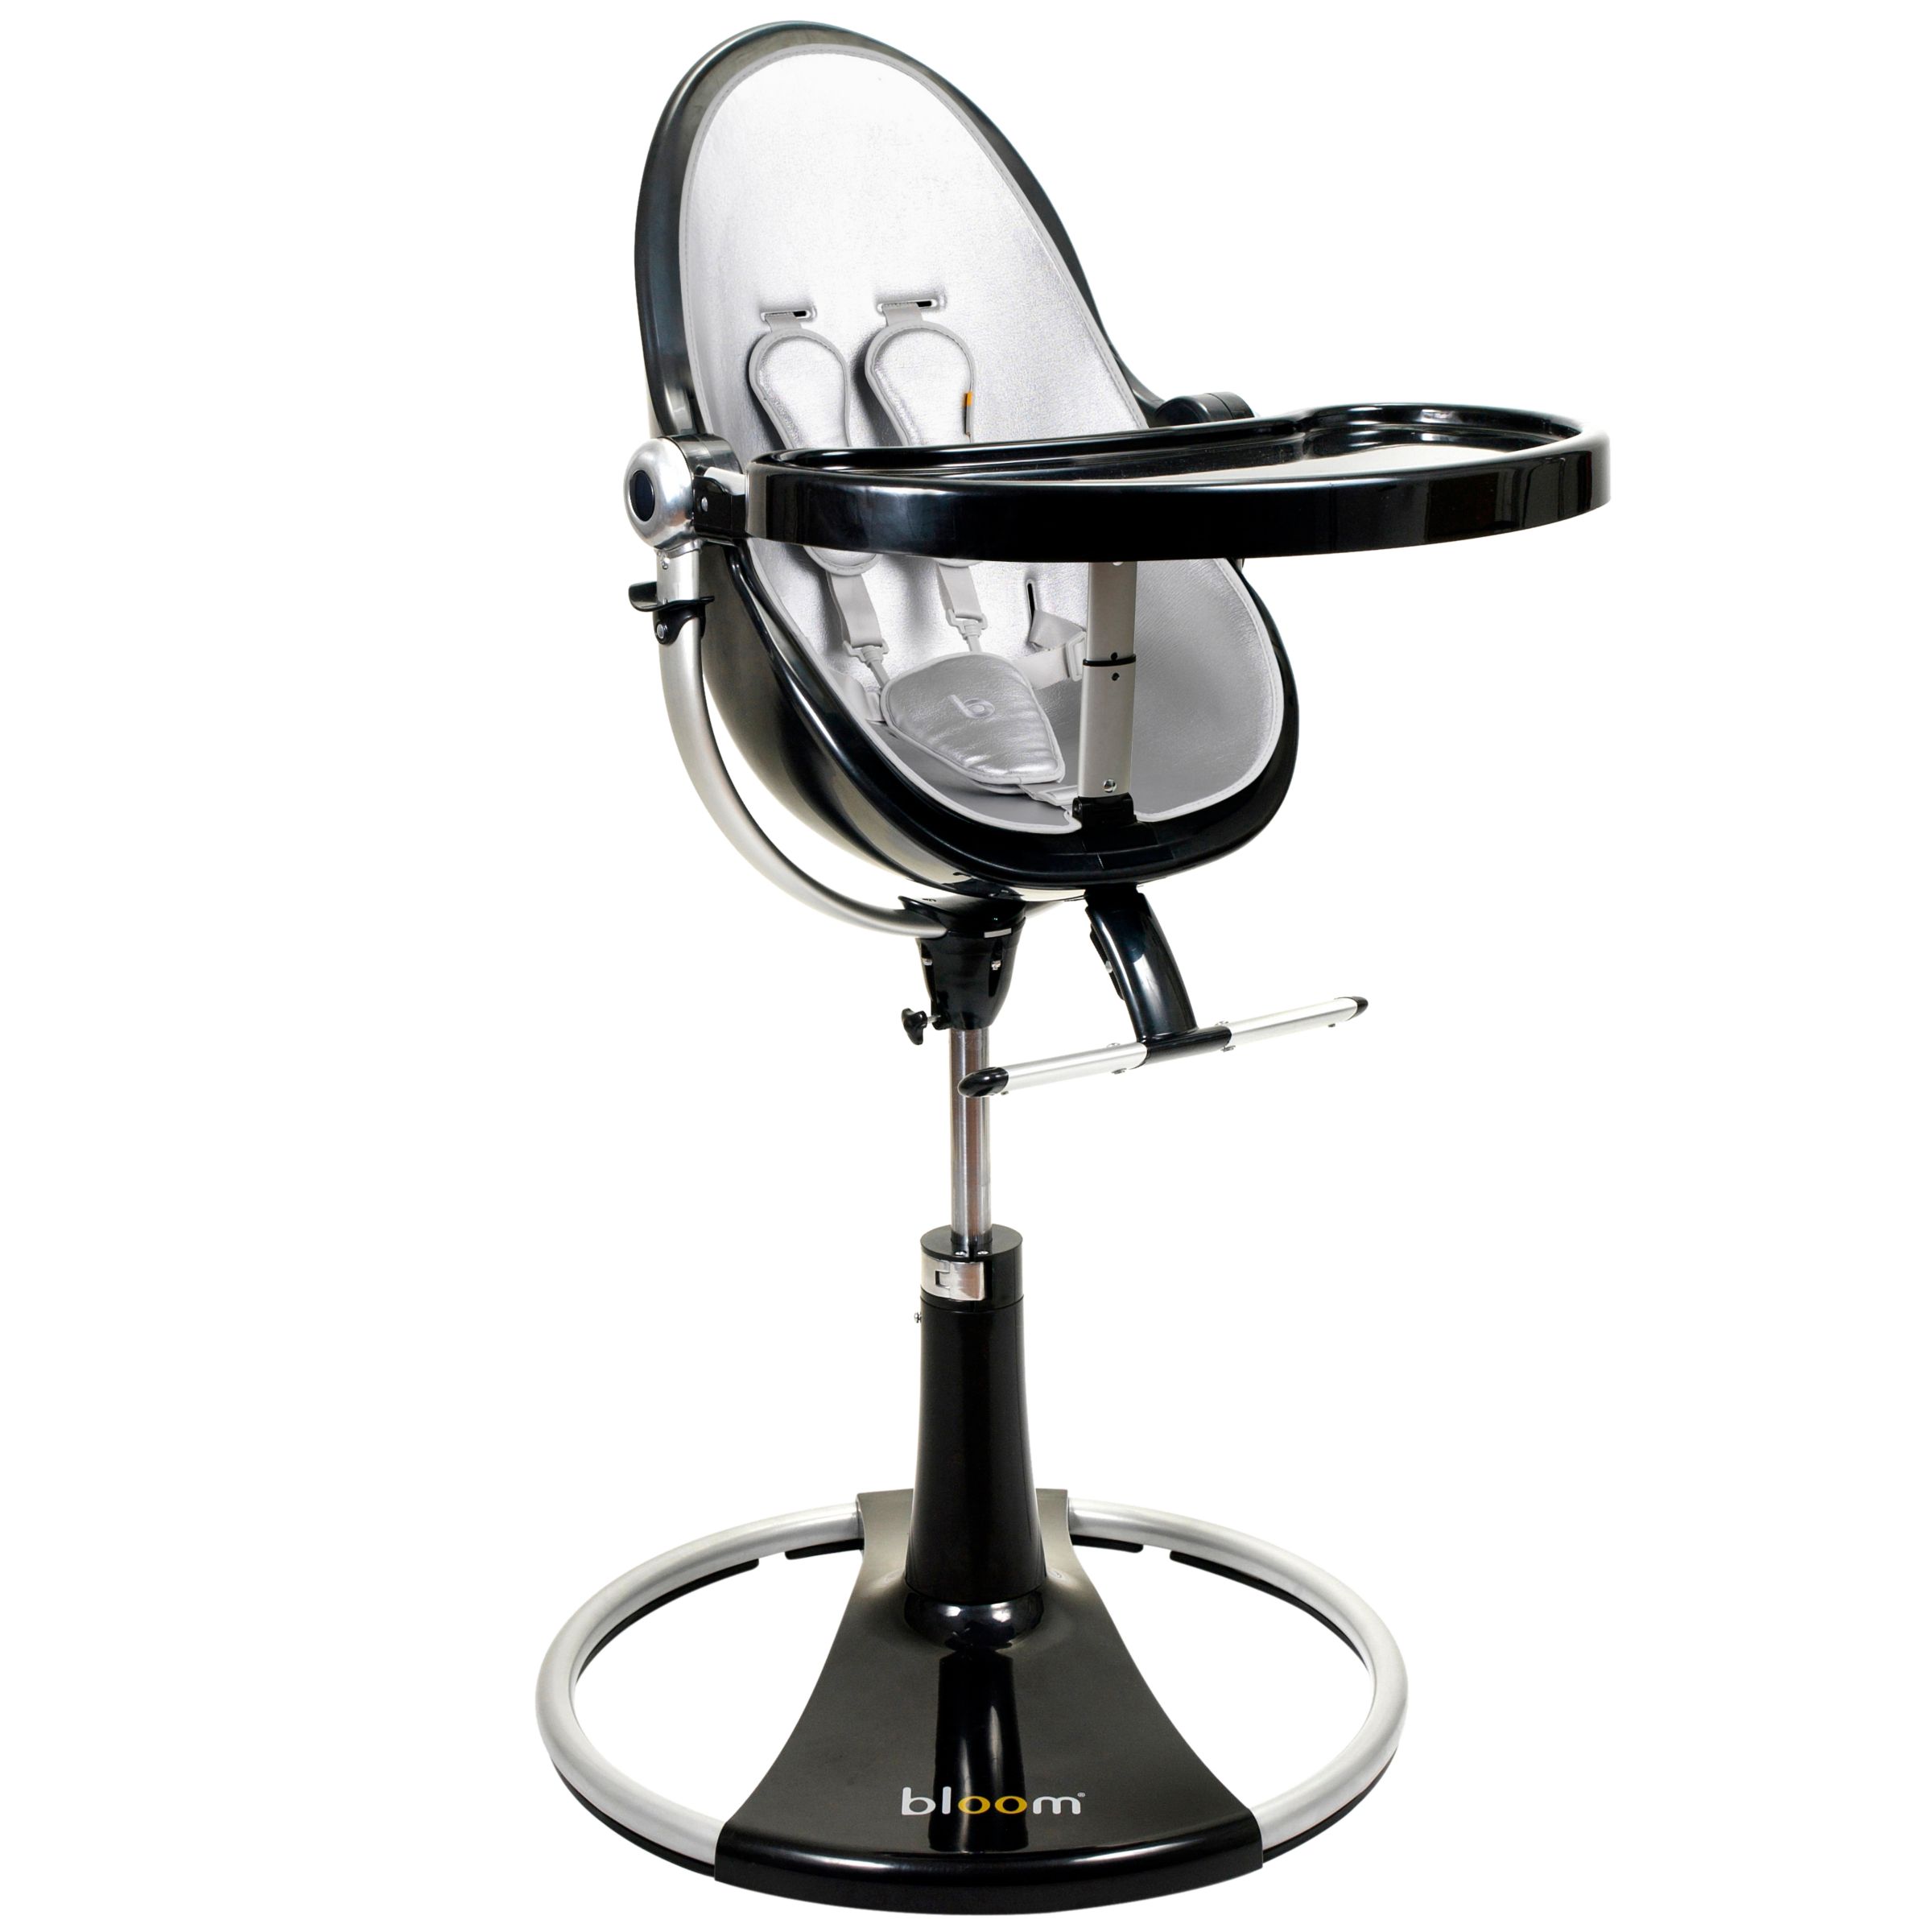 bloom Fresco Loft Contemporary Leatherette Baby Chair, Ebony Black with Lunar Silver at John Lewis